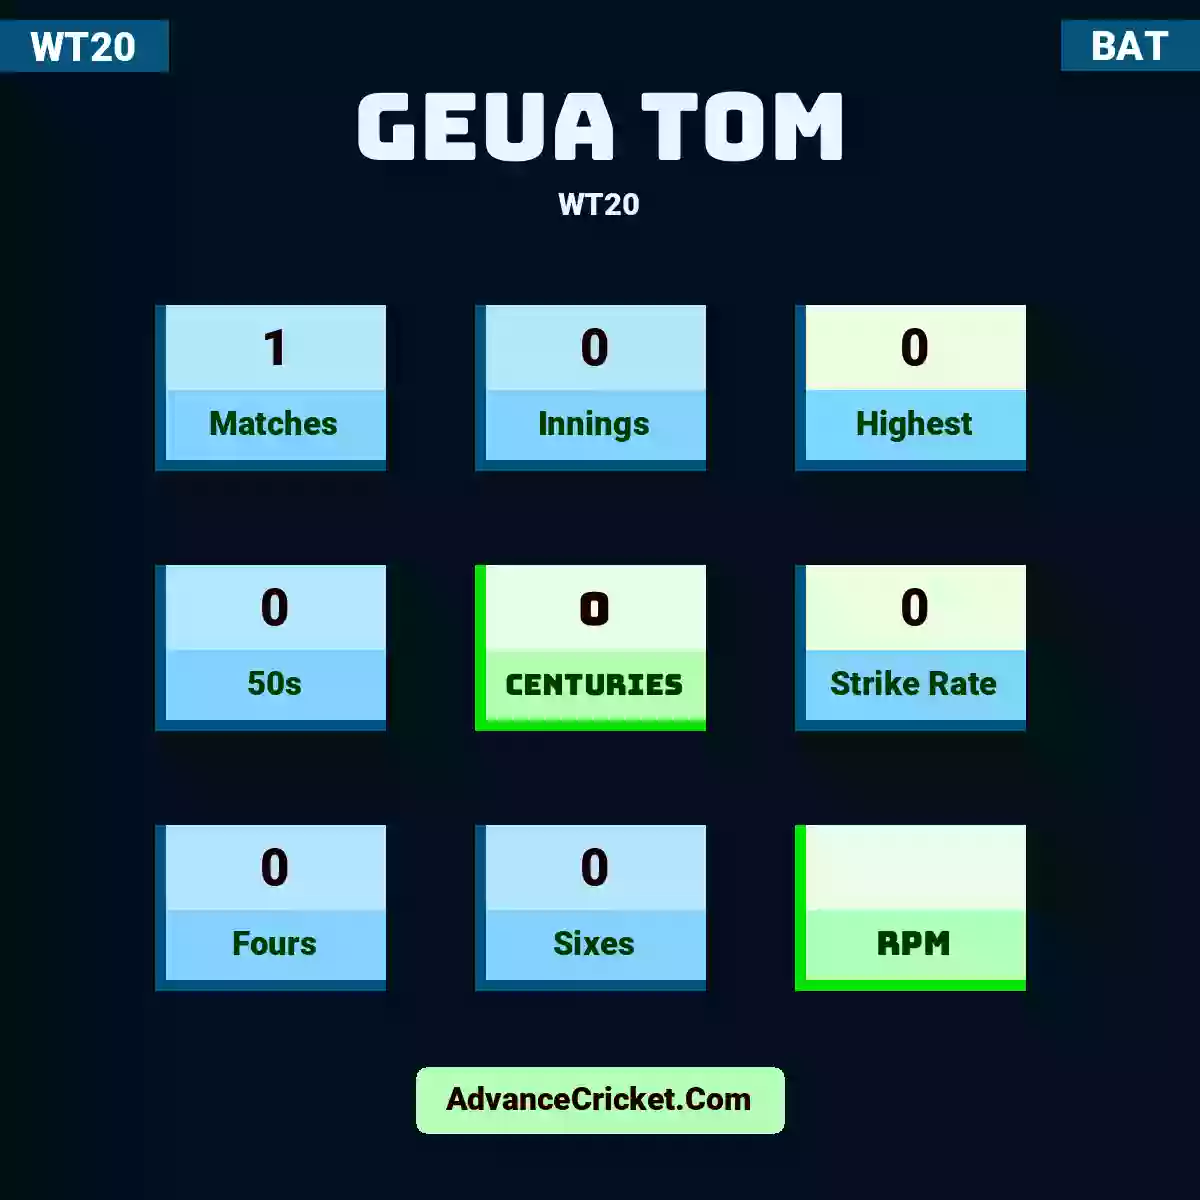 Geua Tom WT20 , Geua Tom played 1 matches, scored 0 runs as highest, 0 half-centuries, and 0 centuries, with a strike rate of 0. G.Tom hit 0 fours and 0 sixes.